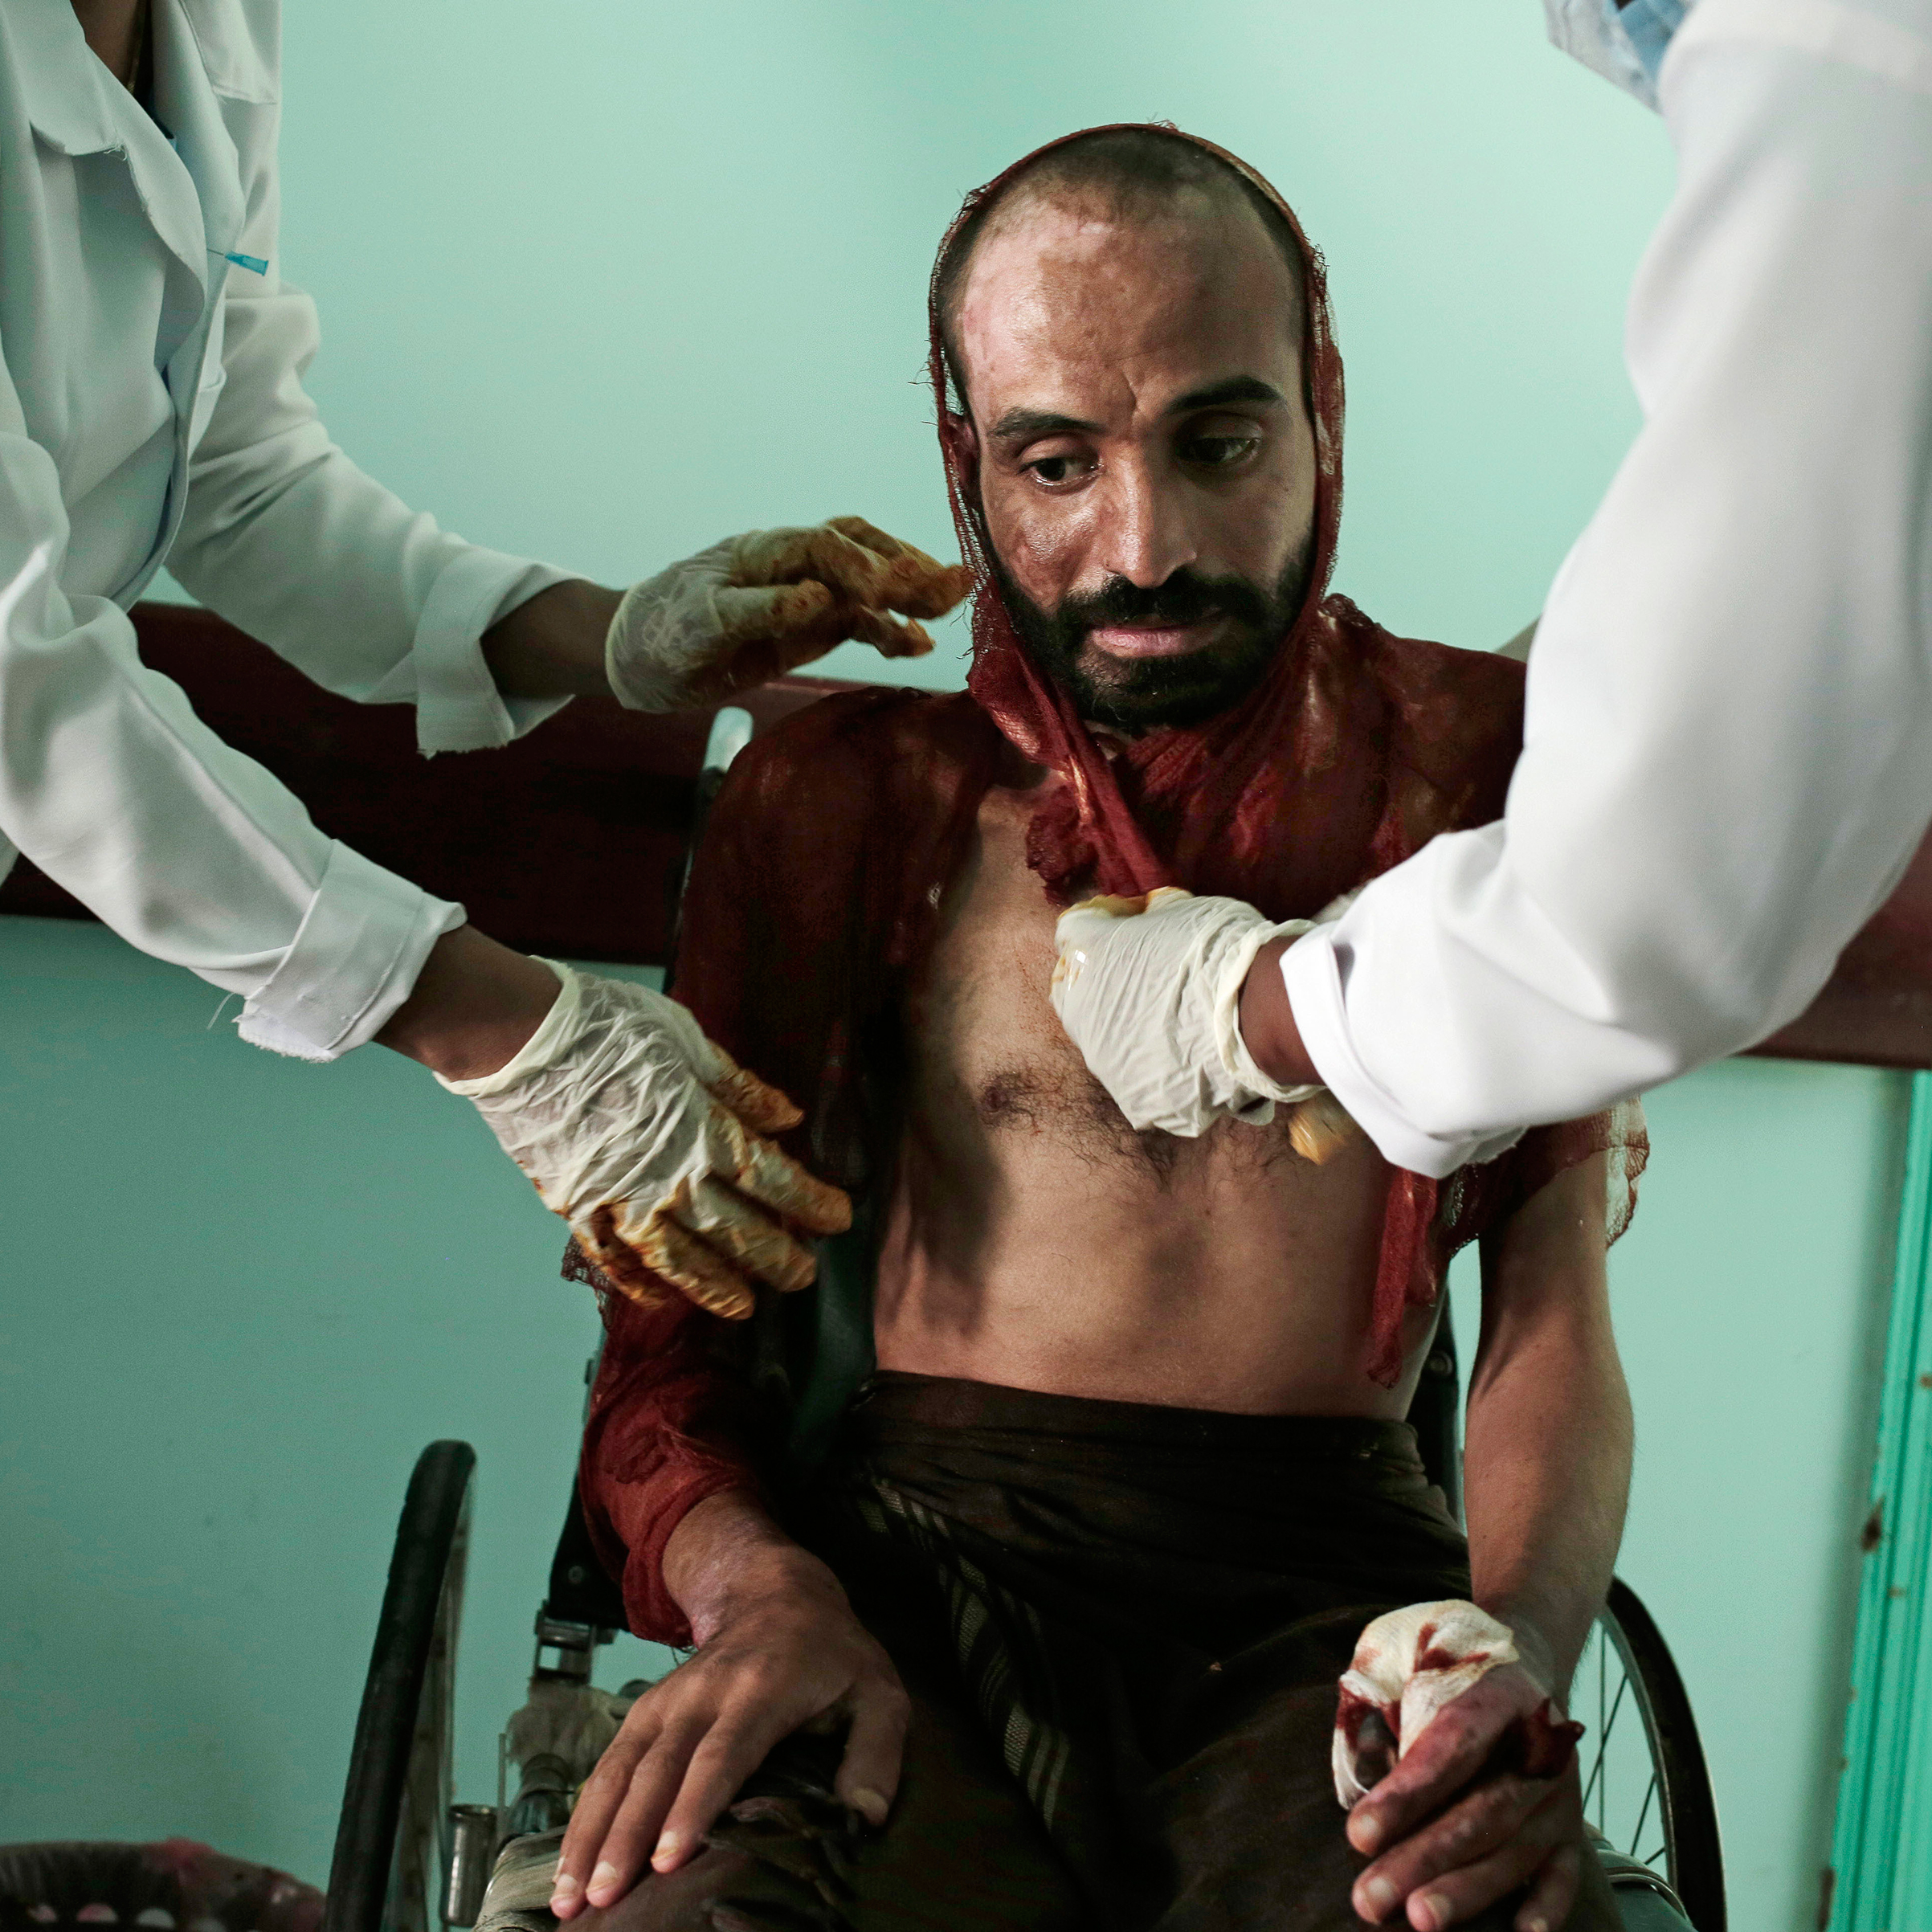 Nurses change the dressings on the severe burns covering Monir al-Sharqi at the Marib General Hospital on July 25. A lab technician, he disappeared for a year; some in his family, and other activists, believe he was detained and tortured by the Houthi rebels, who finally doused him with acid and dumped him in a stream.